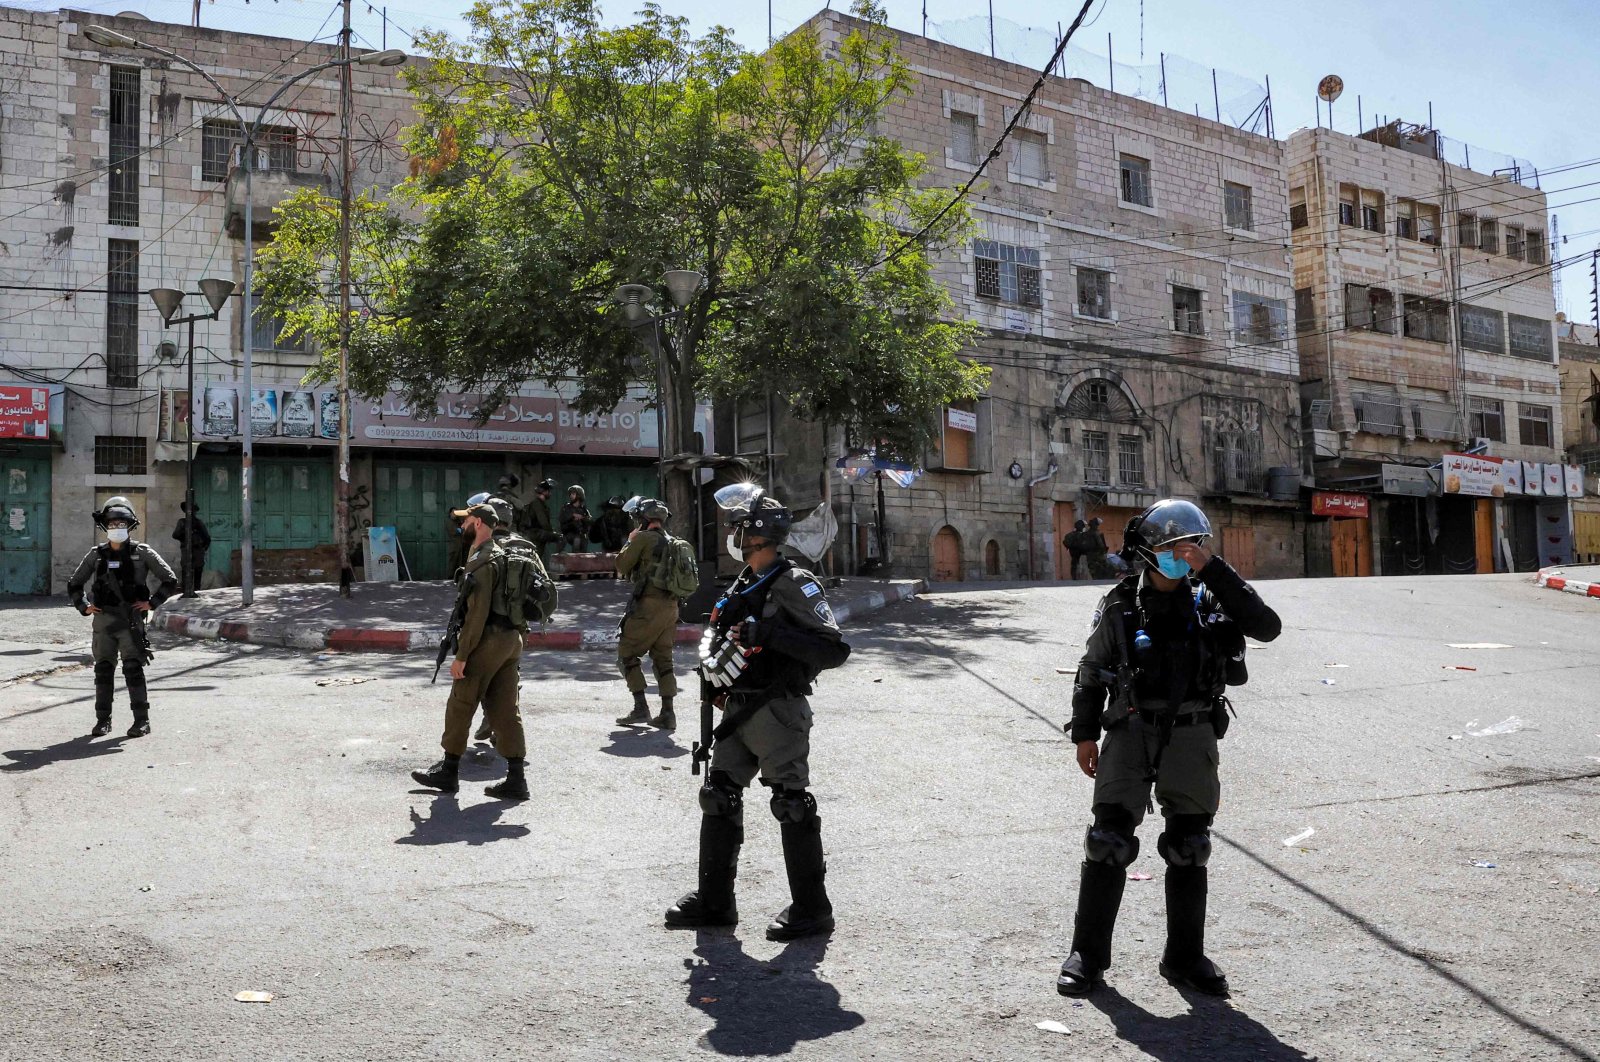 Israeli soldiers stand guard as Israeli forces close down the center of the city of Hebron in the occupied West Bank, Sept. 22, 2021. (AFP Photo)